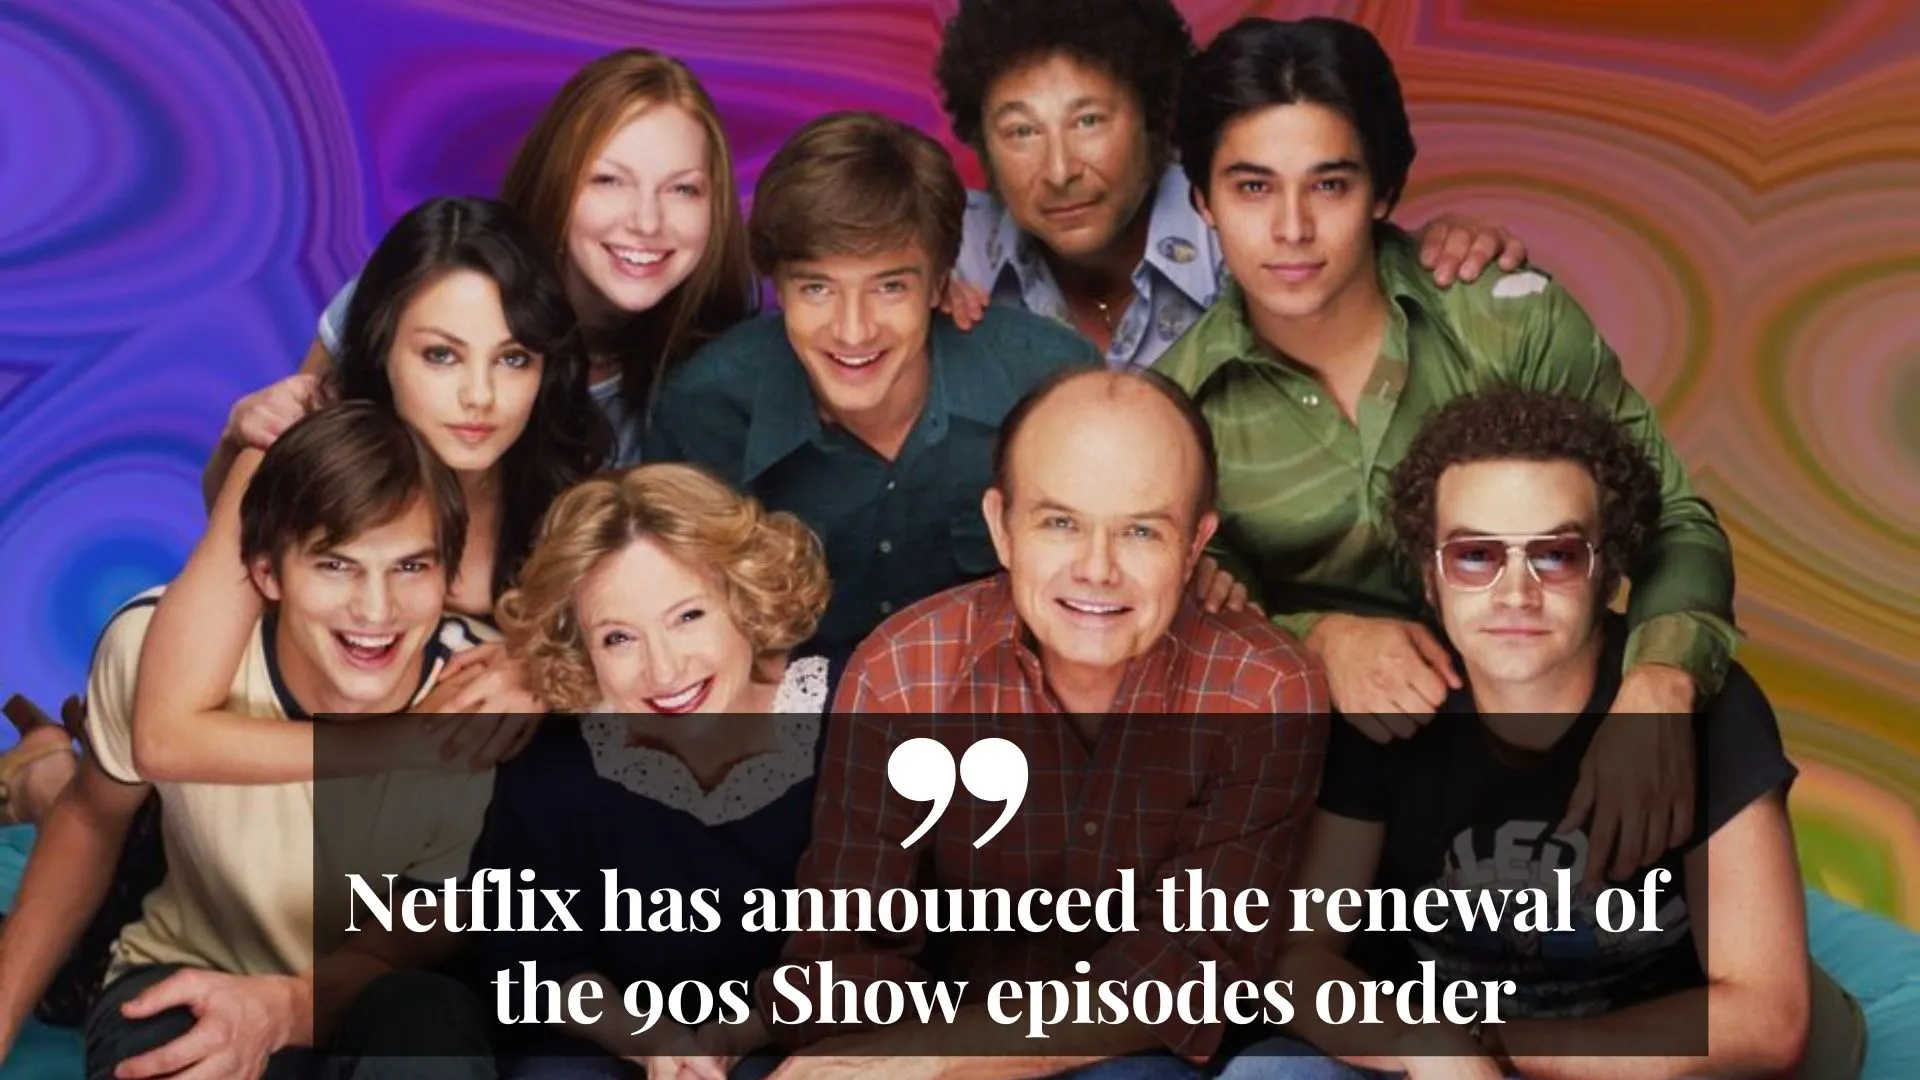 Netflix has announced the renewal of the 90s Show episodes order (Image credit: metroworldnews)